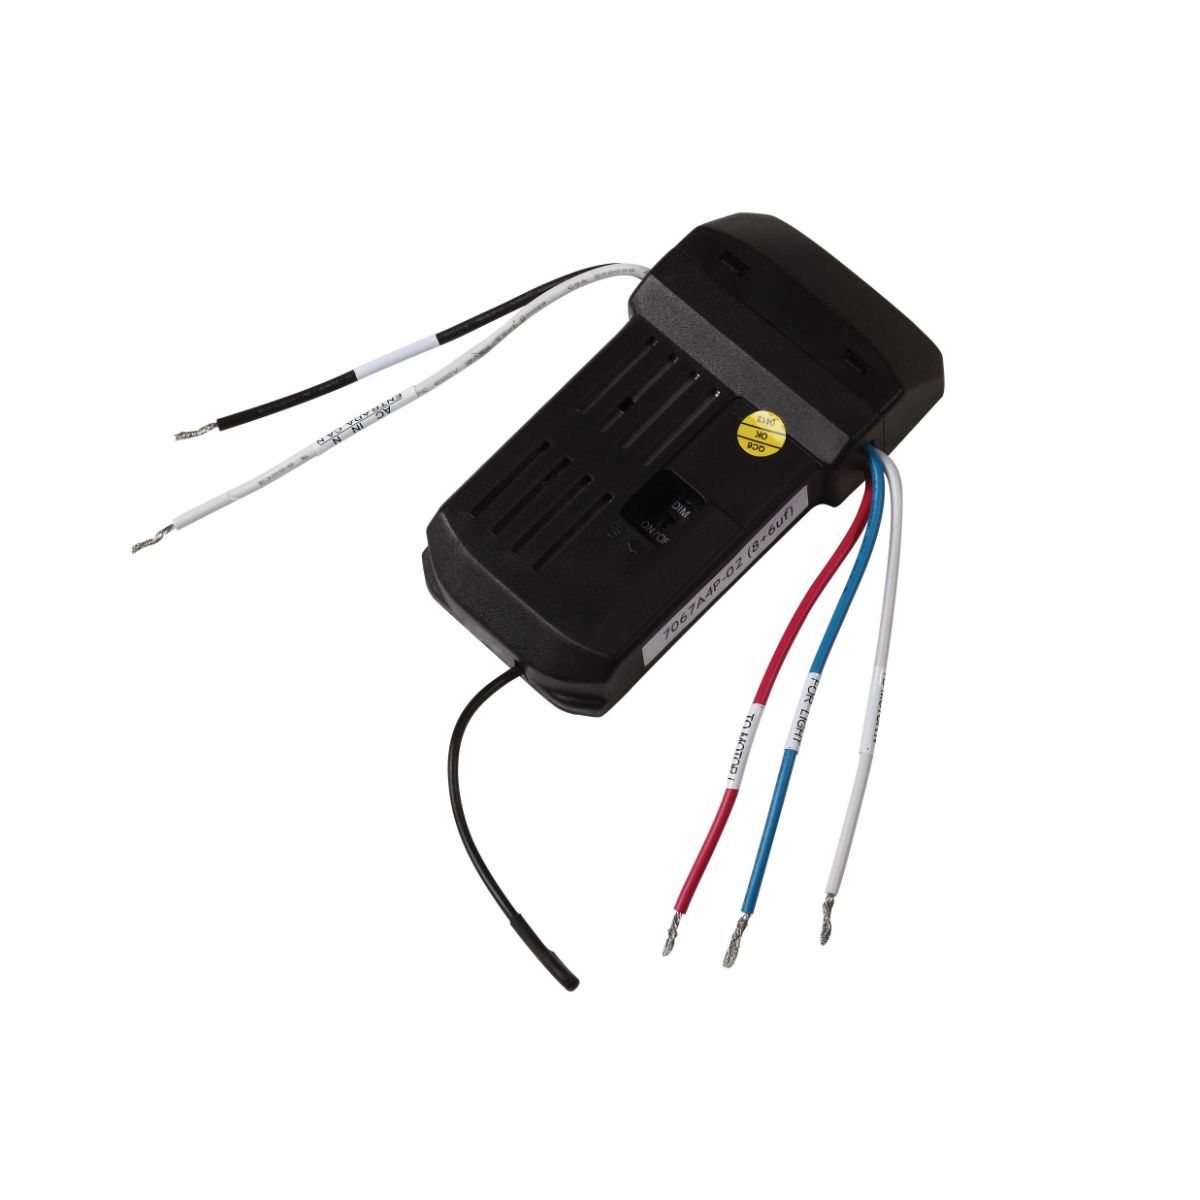 Canopy mounted 4-speed universal receiver Black